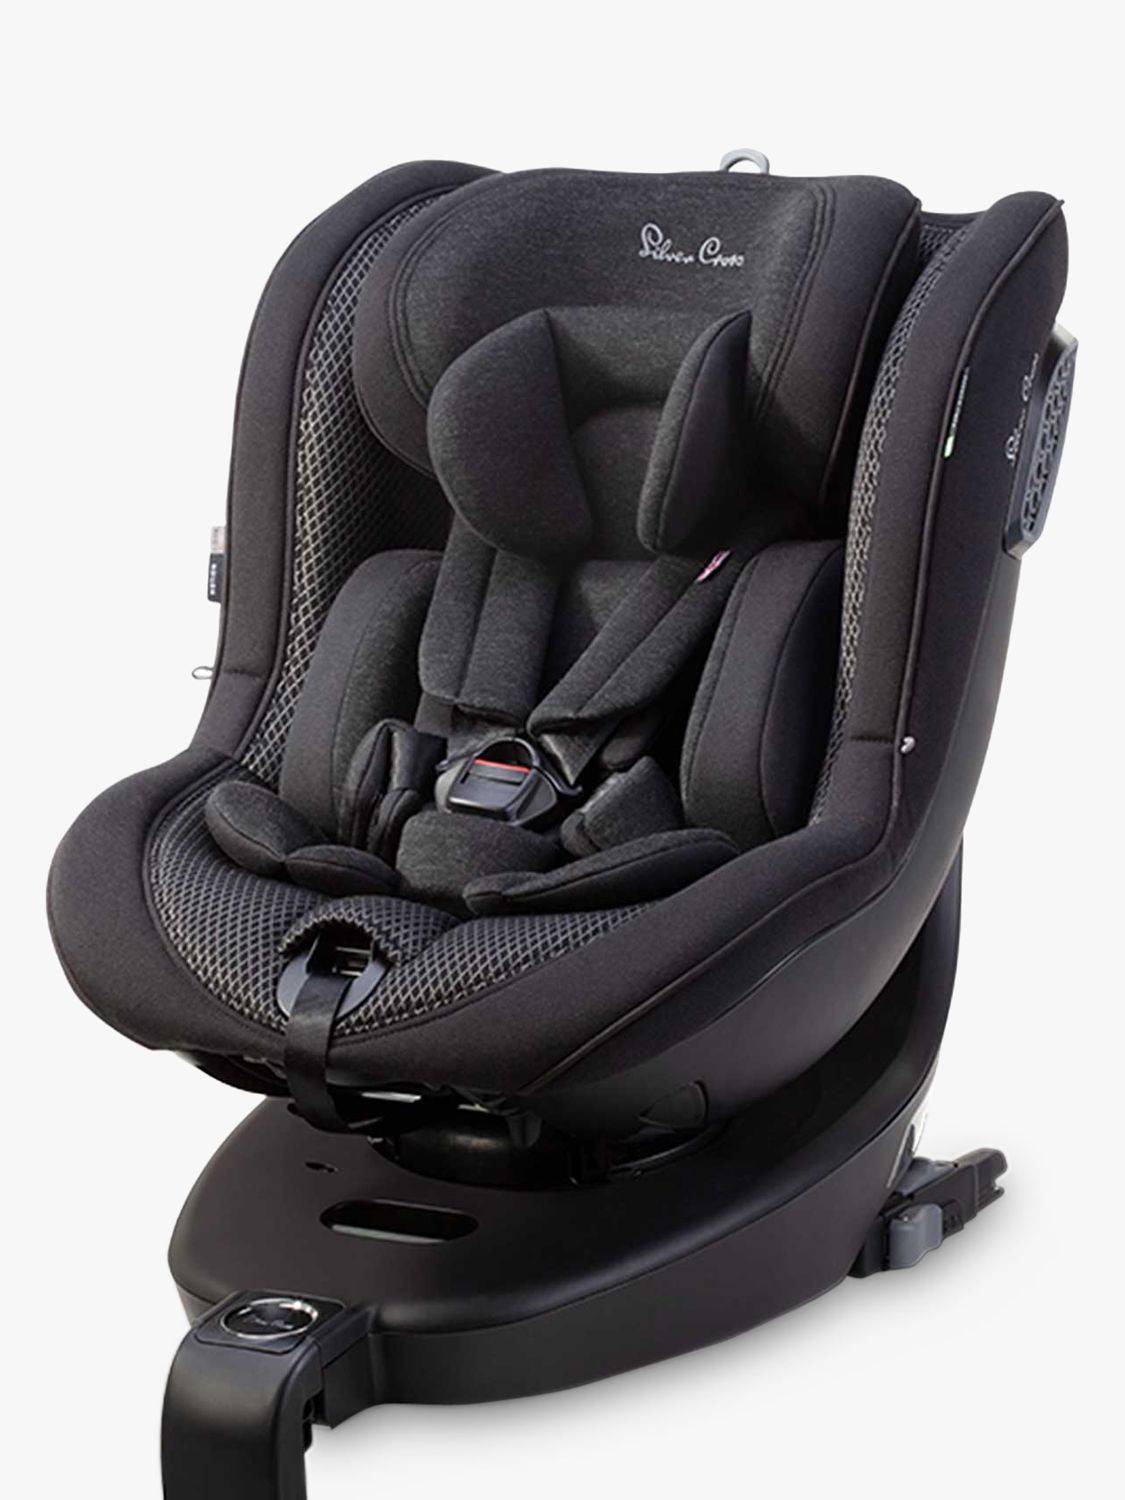 Silver Cross Motion i-Size 360 Rotation Baby Car Seat, All Black at ...